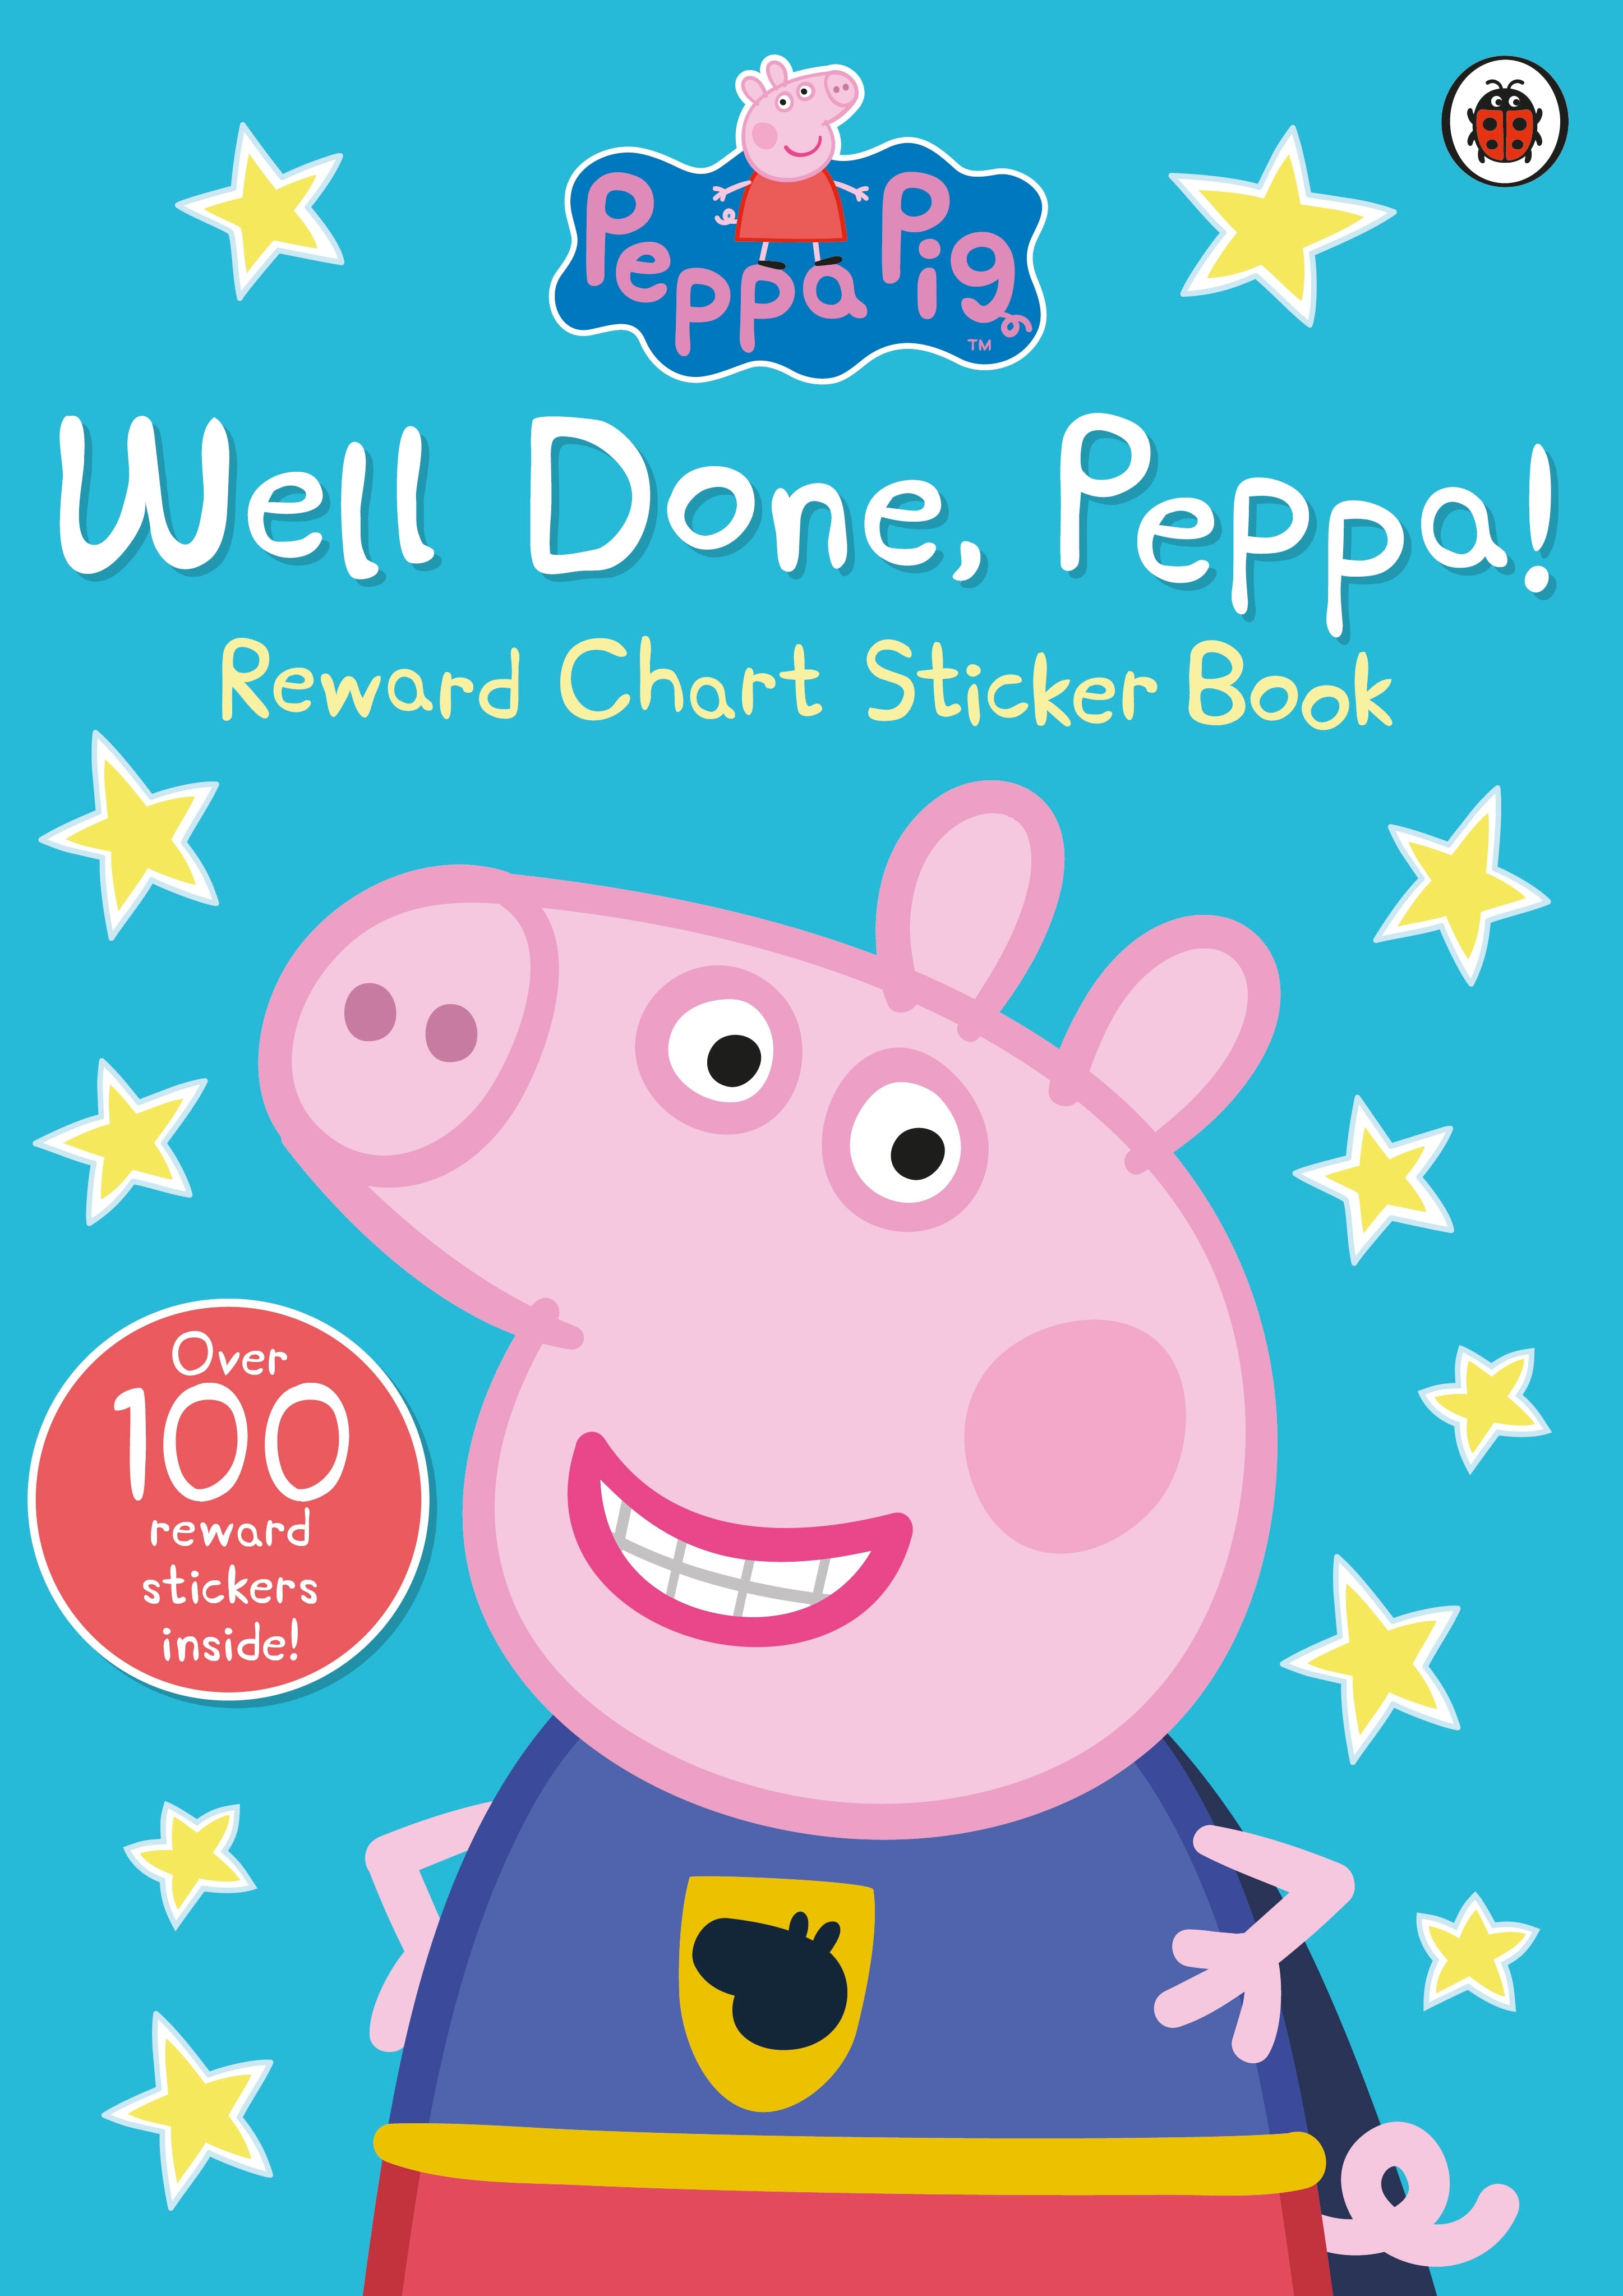 Book “Well Done, Peppa!” by Peppa Pig — March 3, 2016